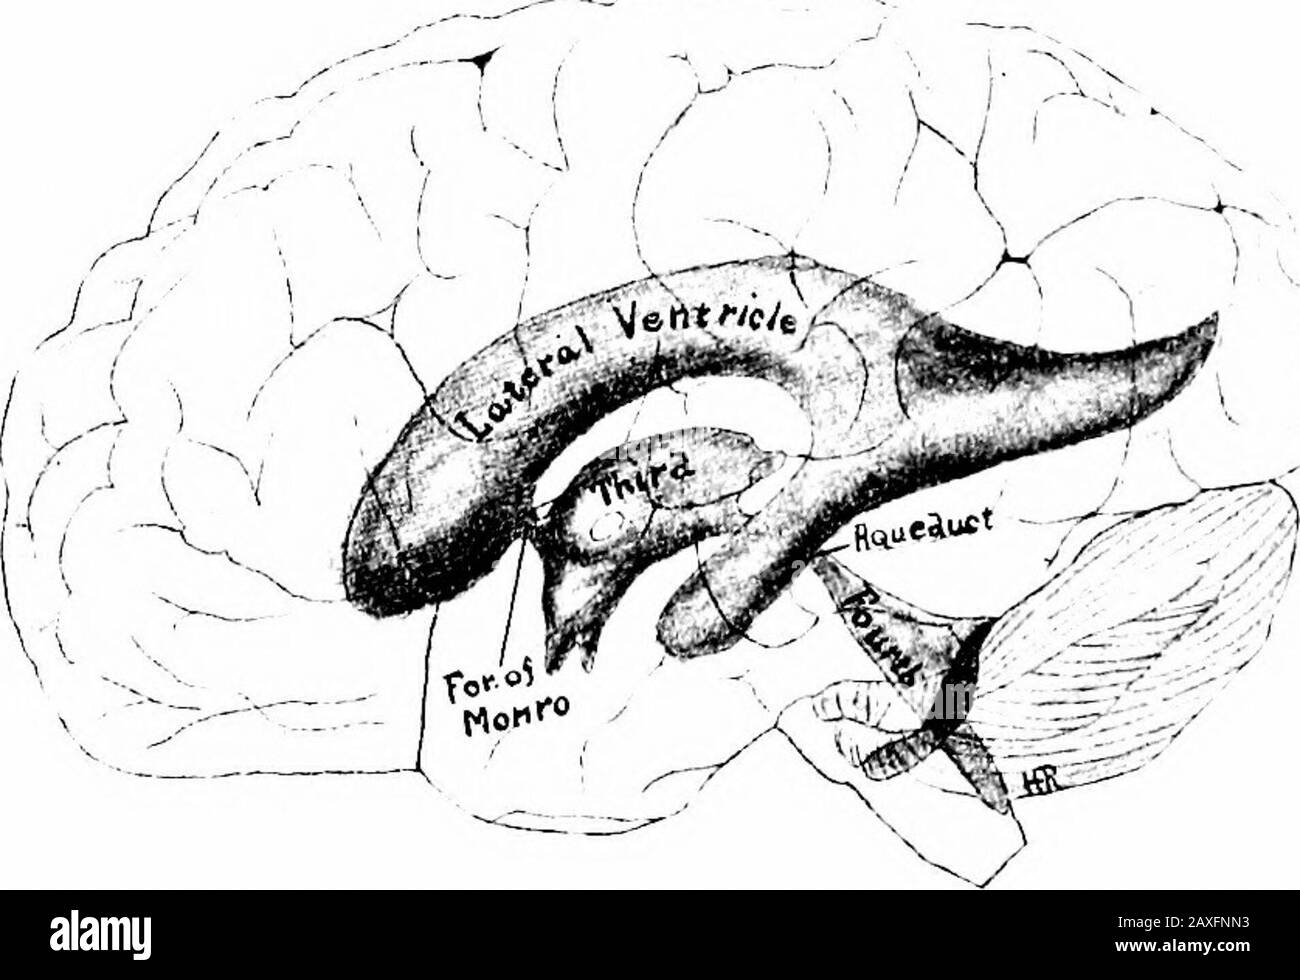 A manual of anatomy . ening near its spinal cord endcalled the foramen of Magendie, which communicates with the sub-arachnoid space. This with the foramina of Luschka permits an THE WHITE SUBSTANCE OF THE CEREBRUM 415 interchange of cerebrospinal fluid between the ventricular systemand the lymph spaces of the membranes covering the brain. By thismeans an equilibrium of pressure is estabhshed inside and outside ofthe brain and spinal cord. The spinal canal is a narrow, tube-like space extending the lengthof the spinal cord; it is located in the gray commissure. It tendsto become obliterated mor Stock Photo